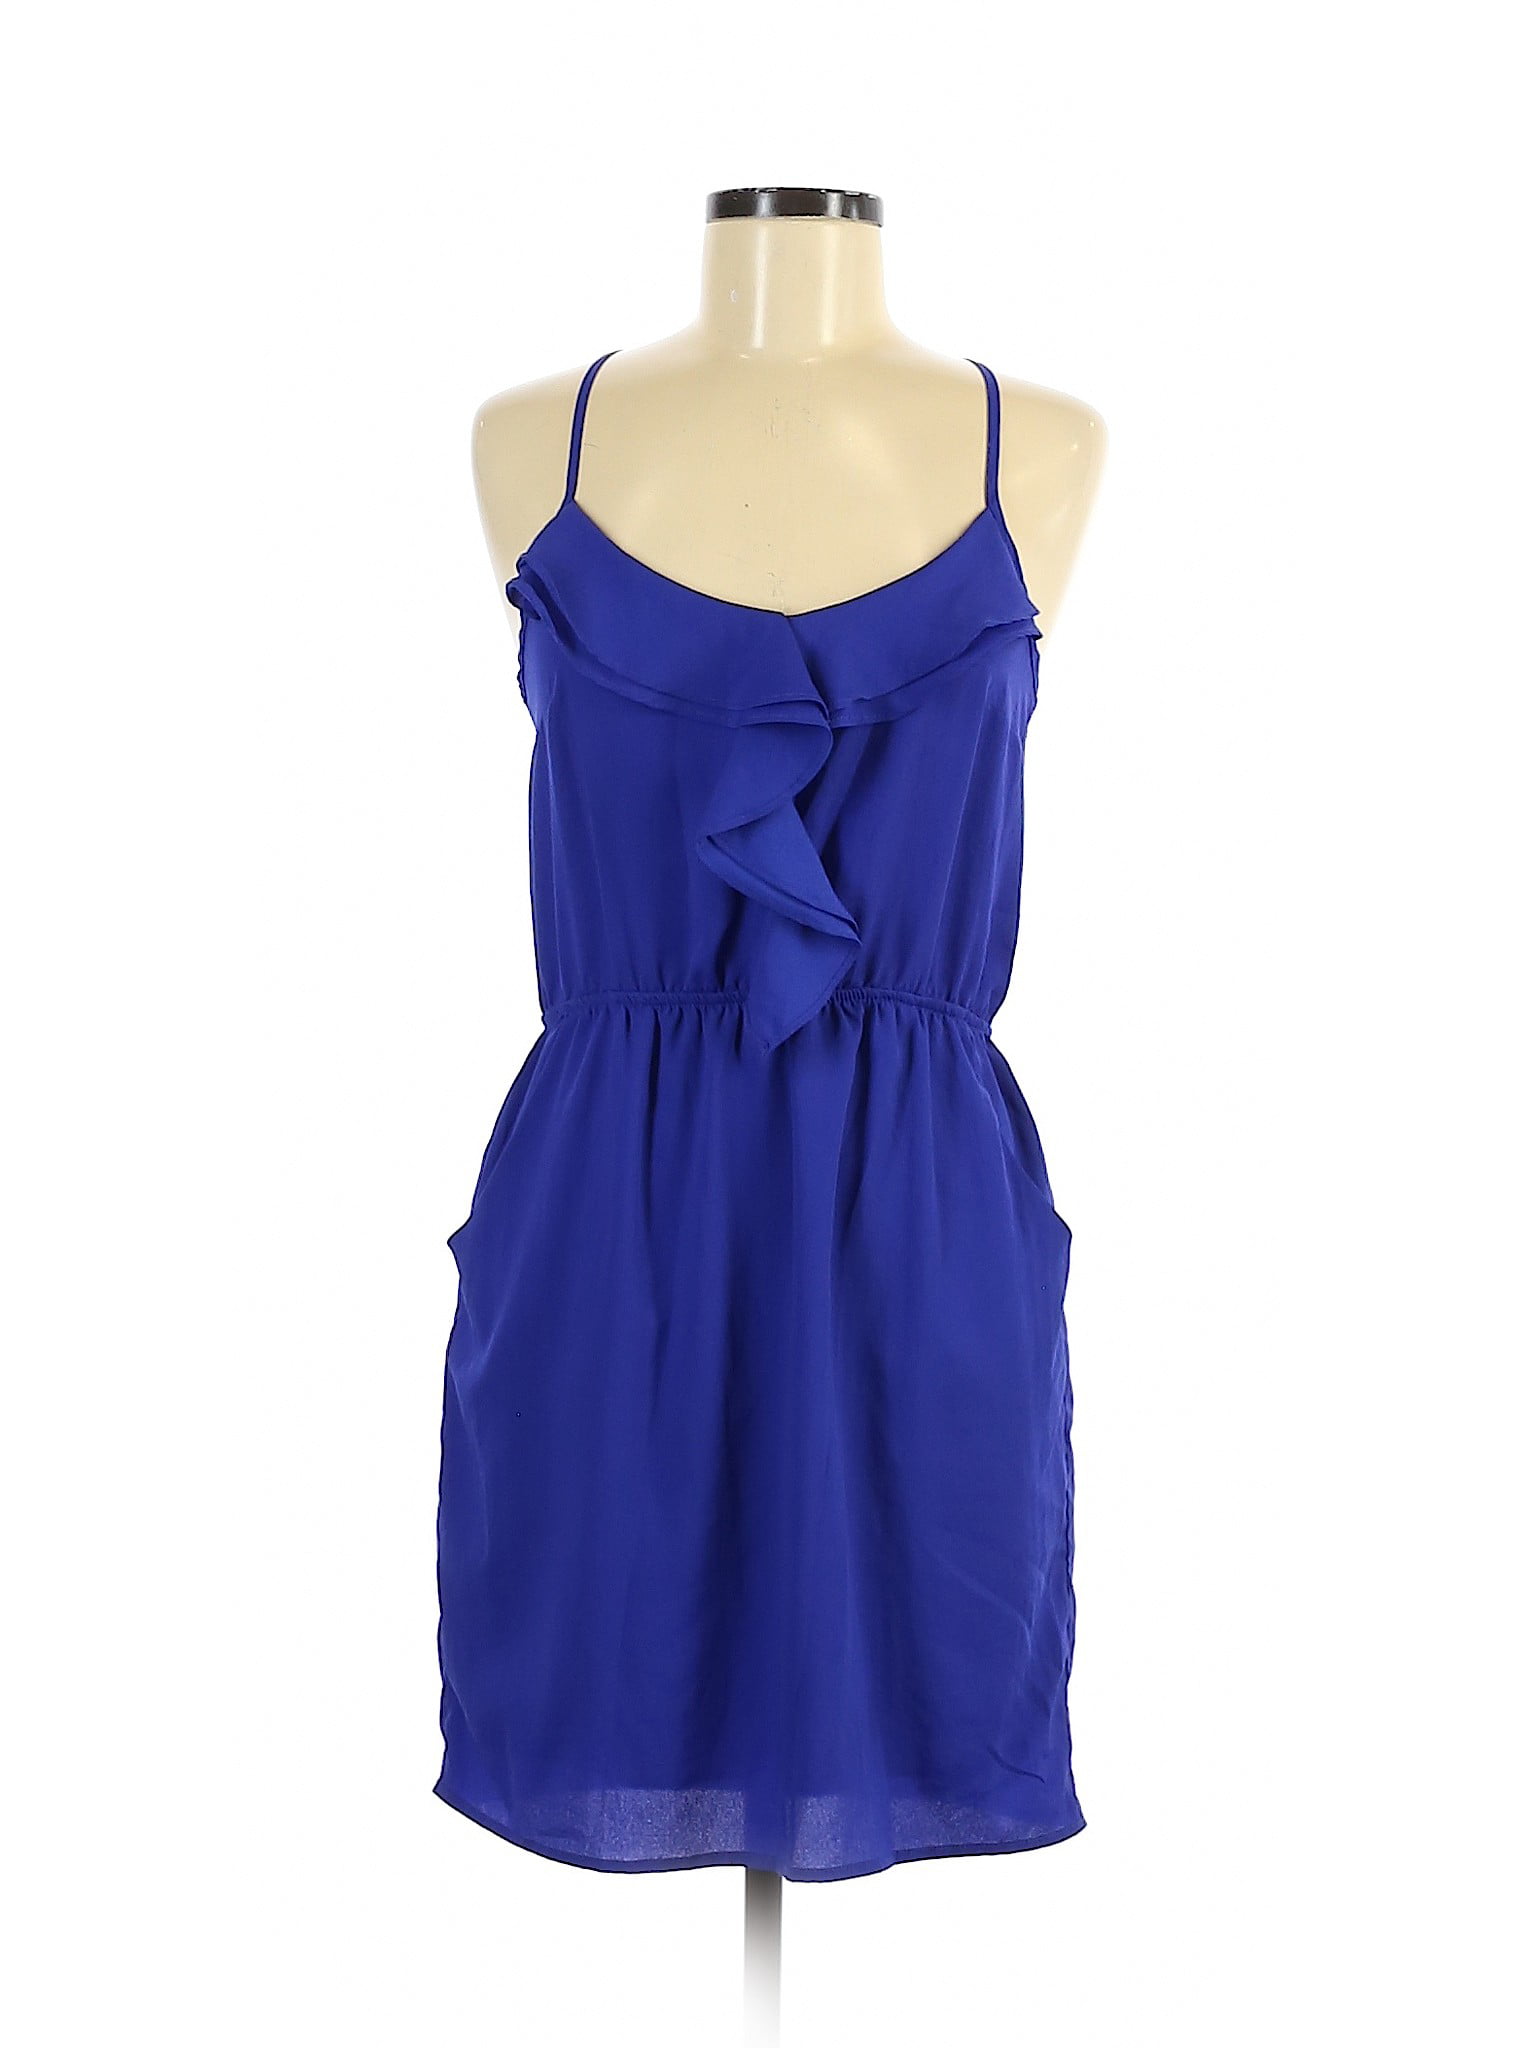 Lush Clothing - Pre-Owned Lush Clothing Women's Size M Casual Dress ...